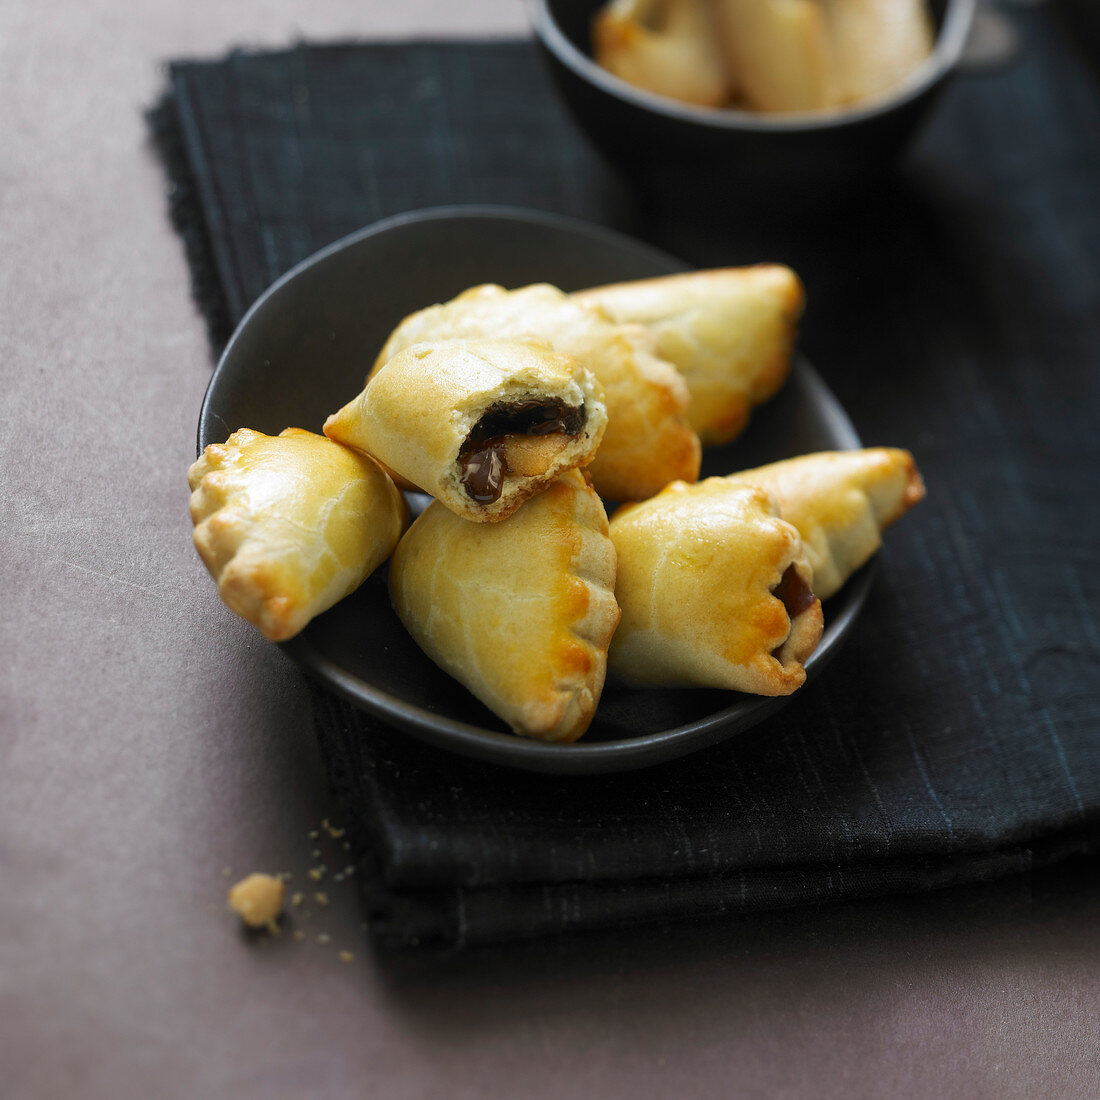 Pear and chocolate and chocolate chip turnovers